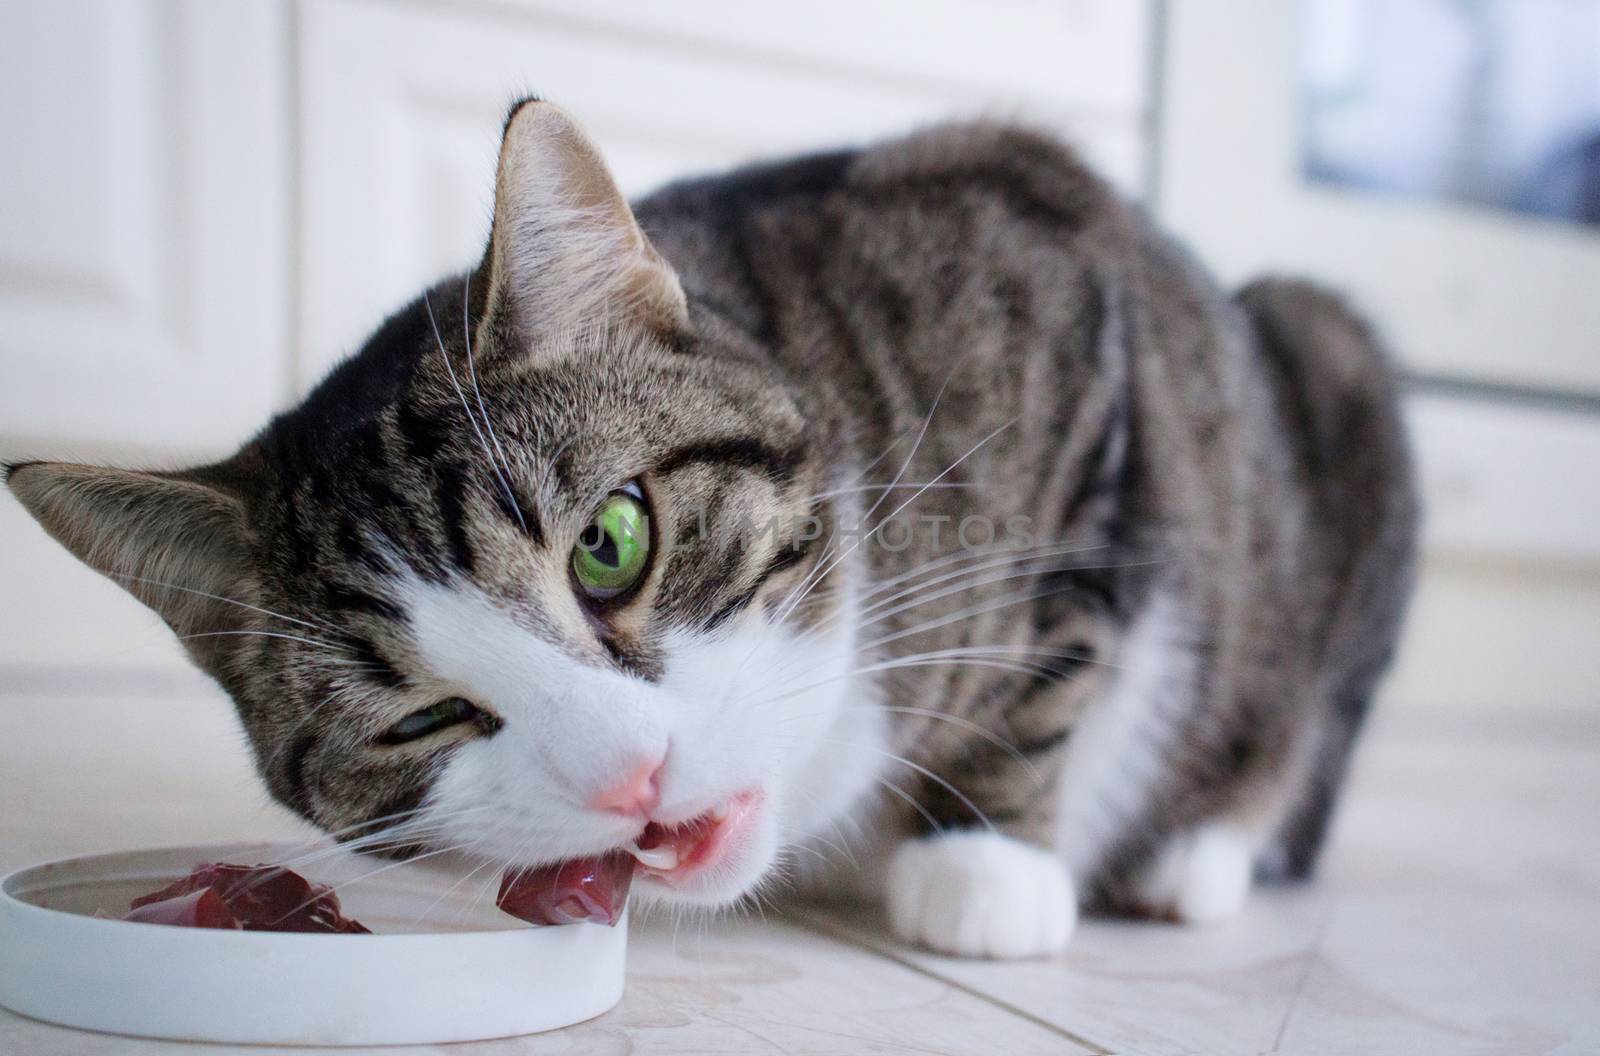 Domestic pet cat with multicolored blue and green eyes eats meat meal from feeding bowl